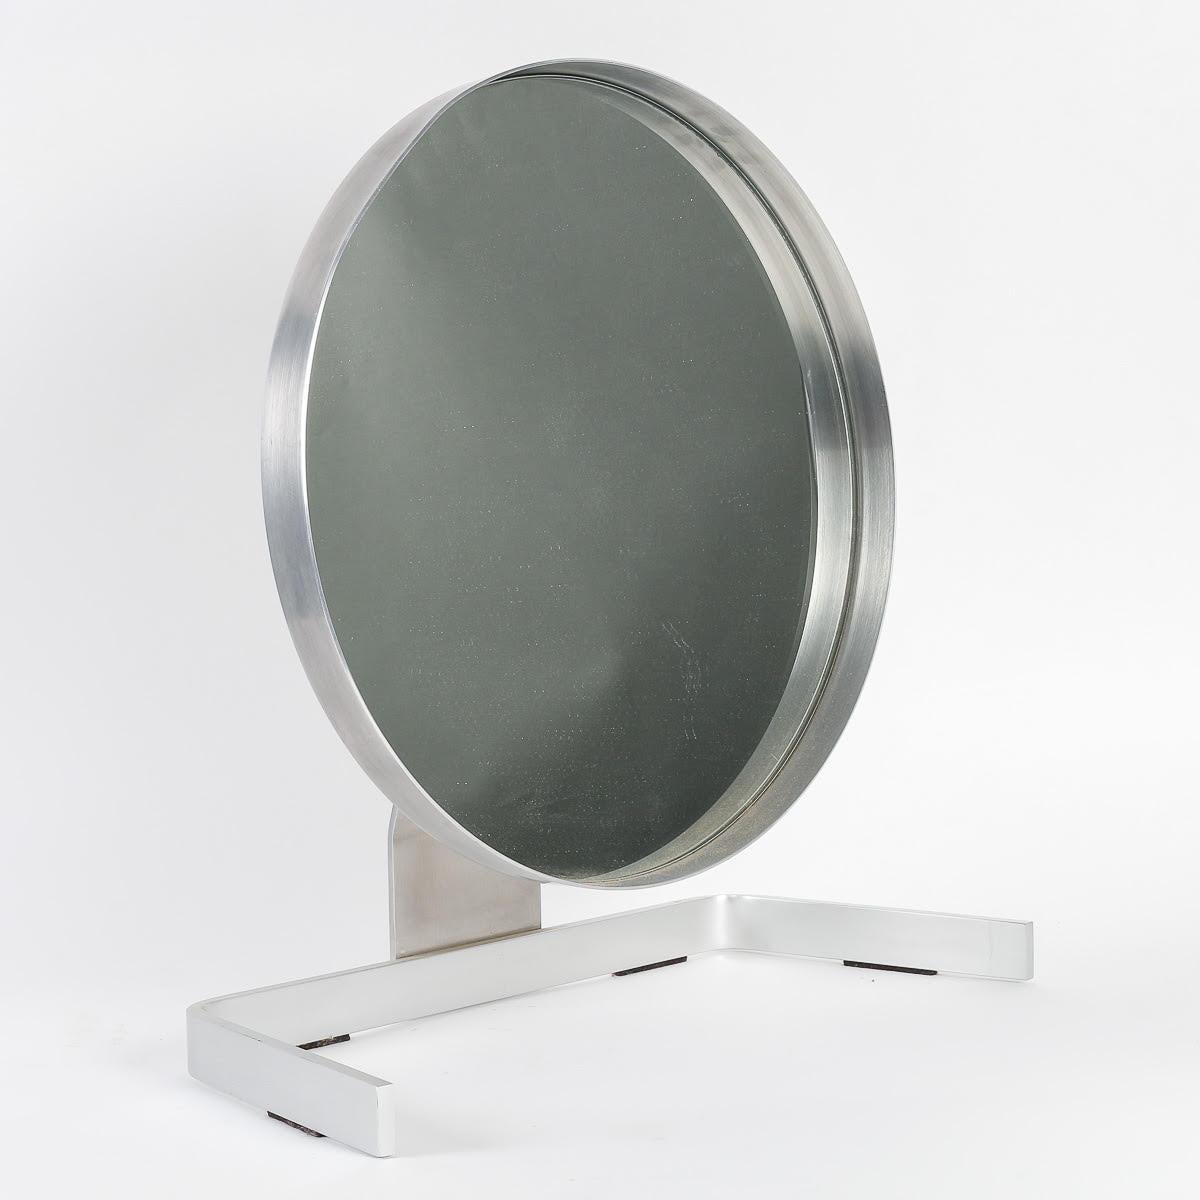 Table mirror by Pierre Vandel, 1970, Steel and mirror.

Steel and mirror table mirror by Pierre Vandel from the 1970s. Slight deformation of the rounded part of the mirror.  
h: 47,5cm , w: 44cm, d: 22cm